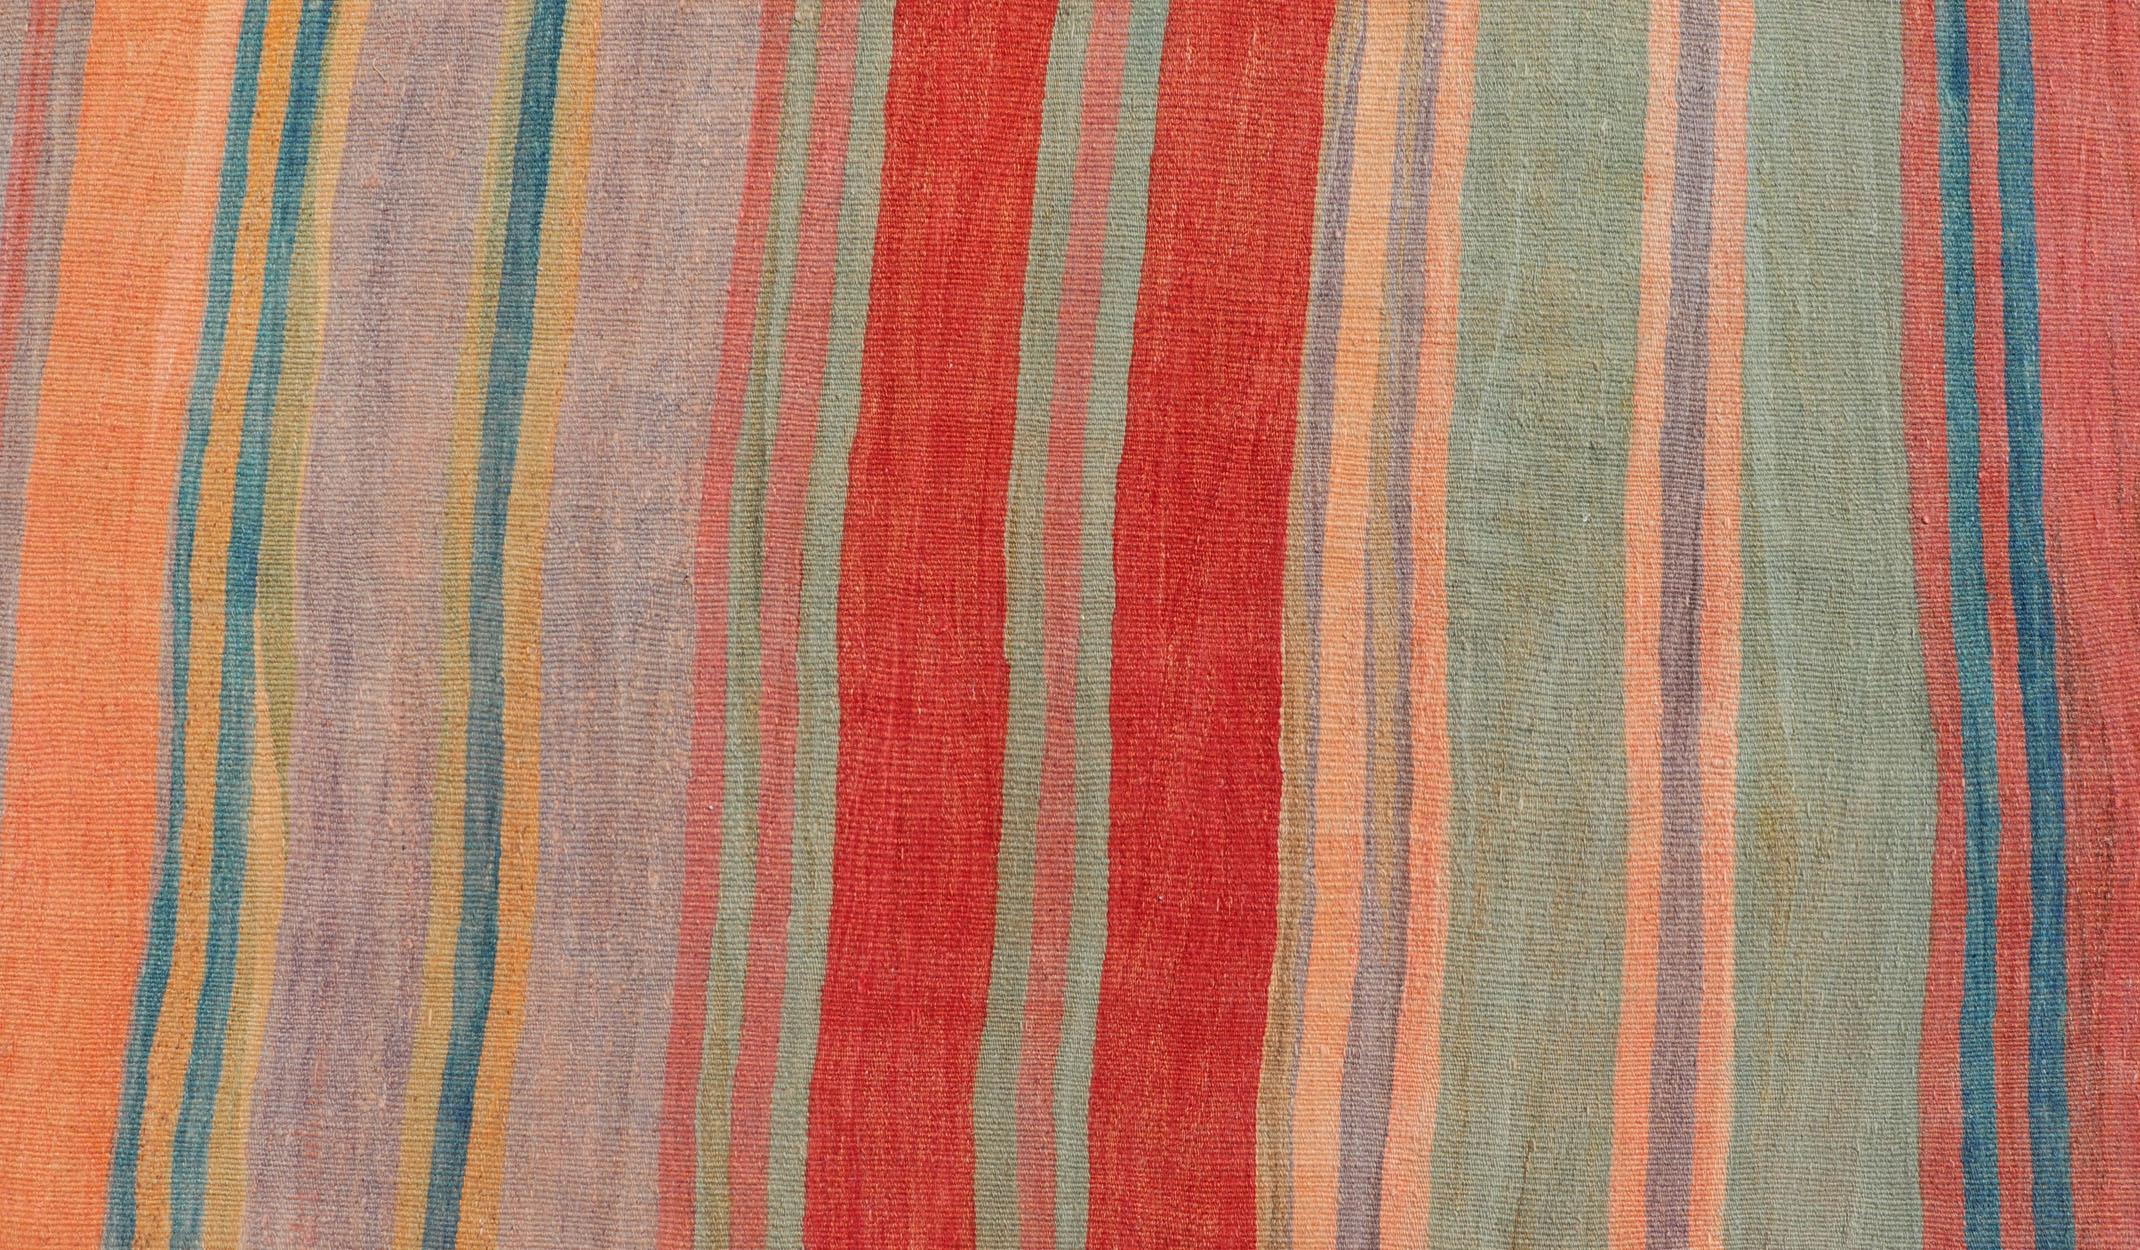 Hand-Woven Vintage Turkish Kilim Runner with Stripes in Red, Green, Yellow, and Multi Color For Sale